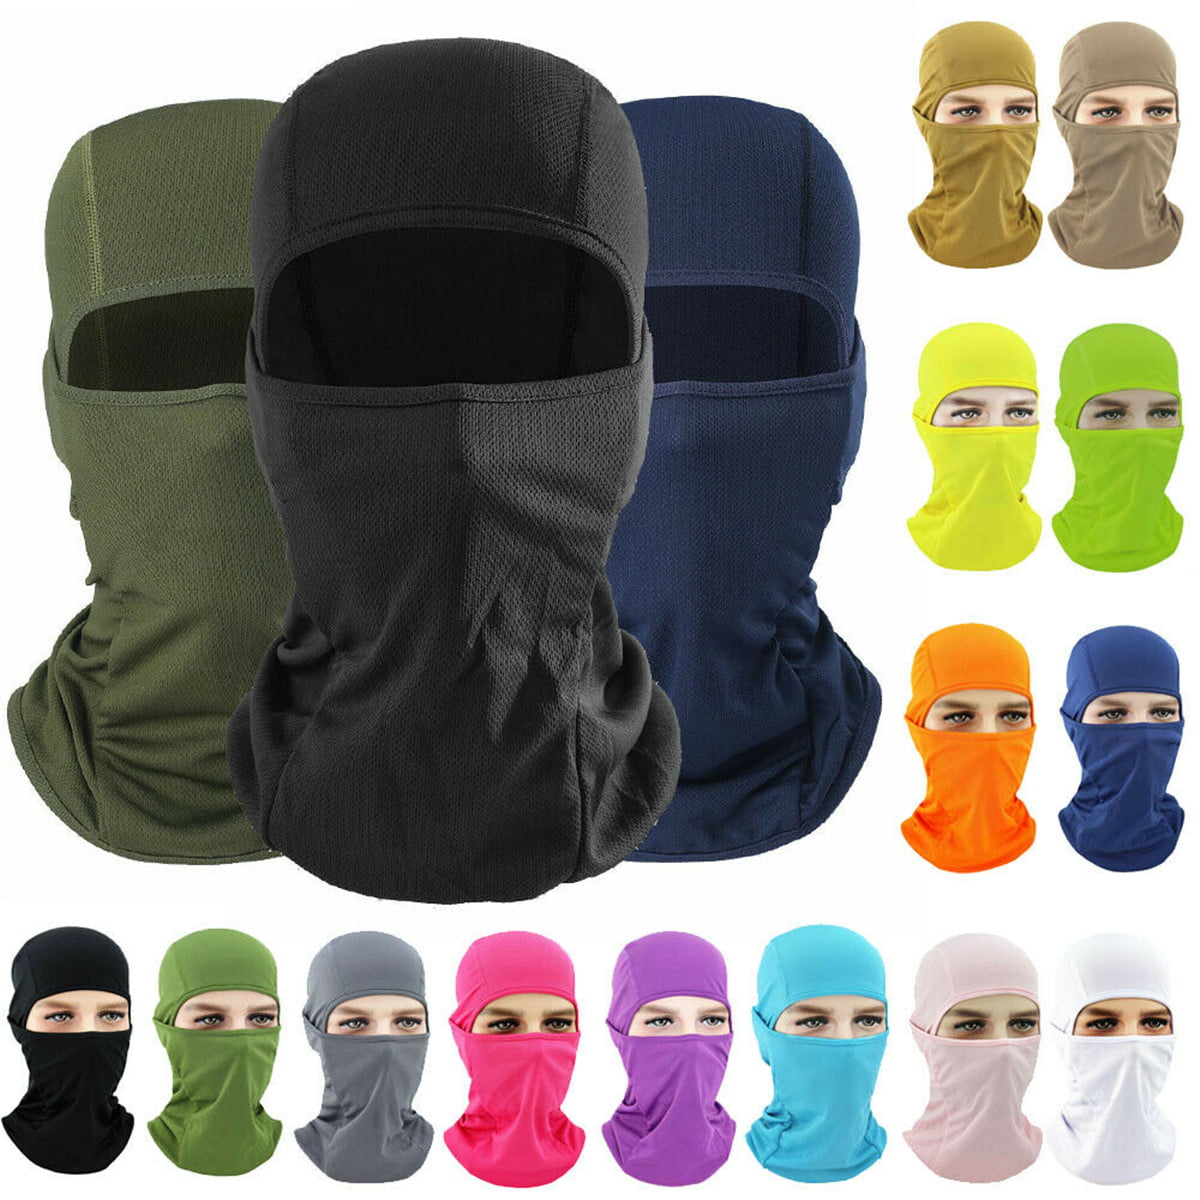 Balaclava Tactical Motorcycle Cycling Sport Outdoor Ski Full Face Mask Helmet 